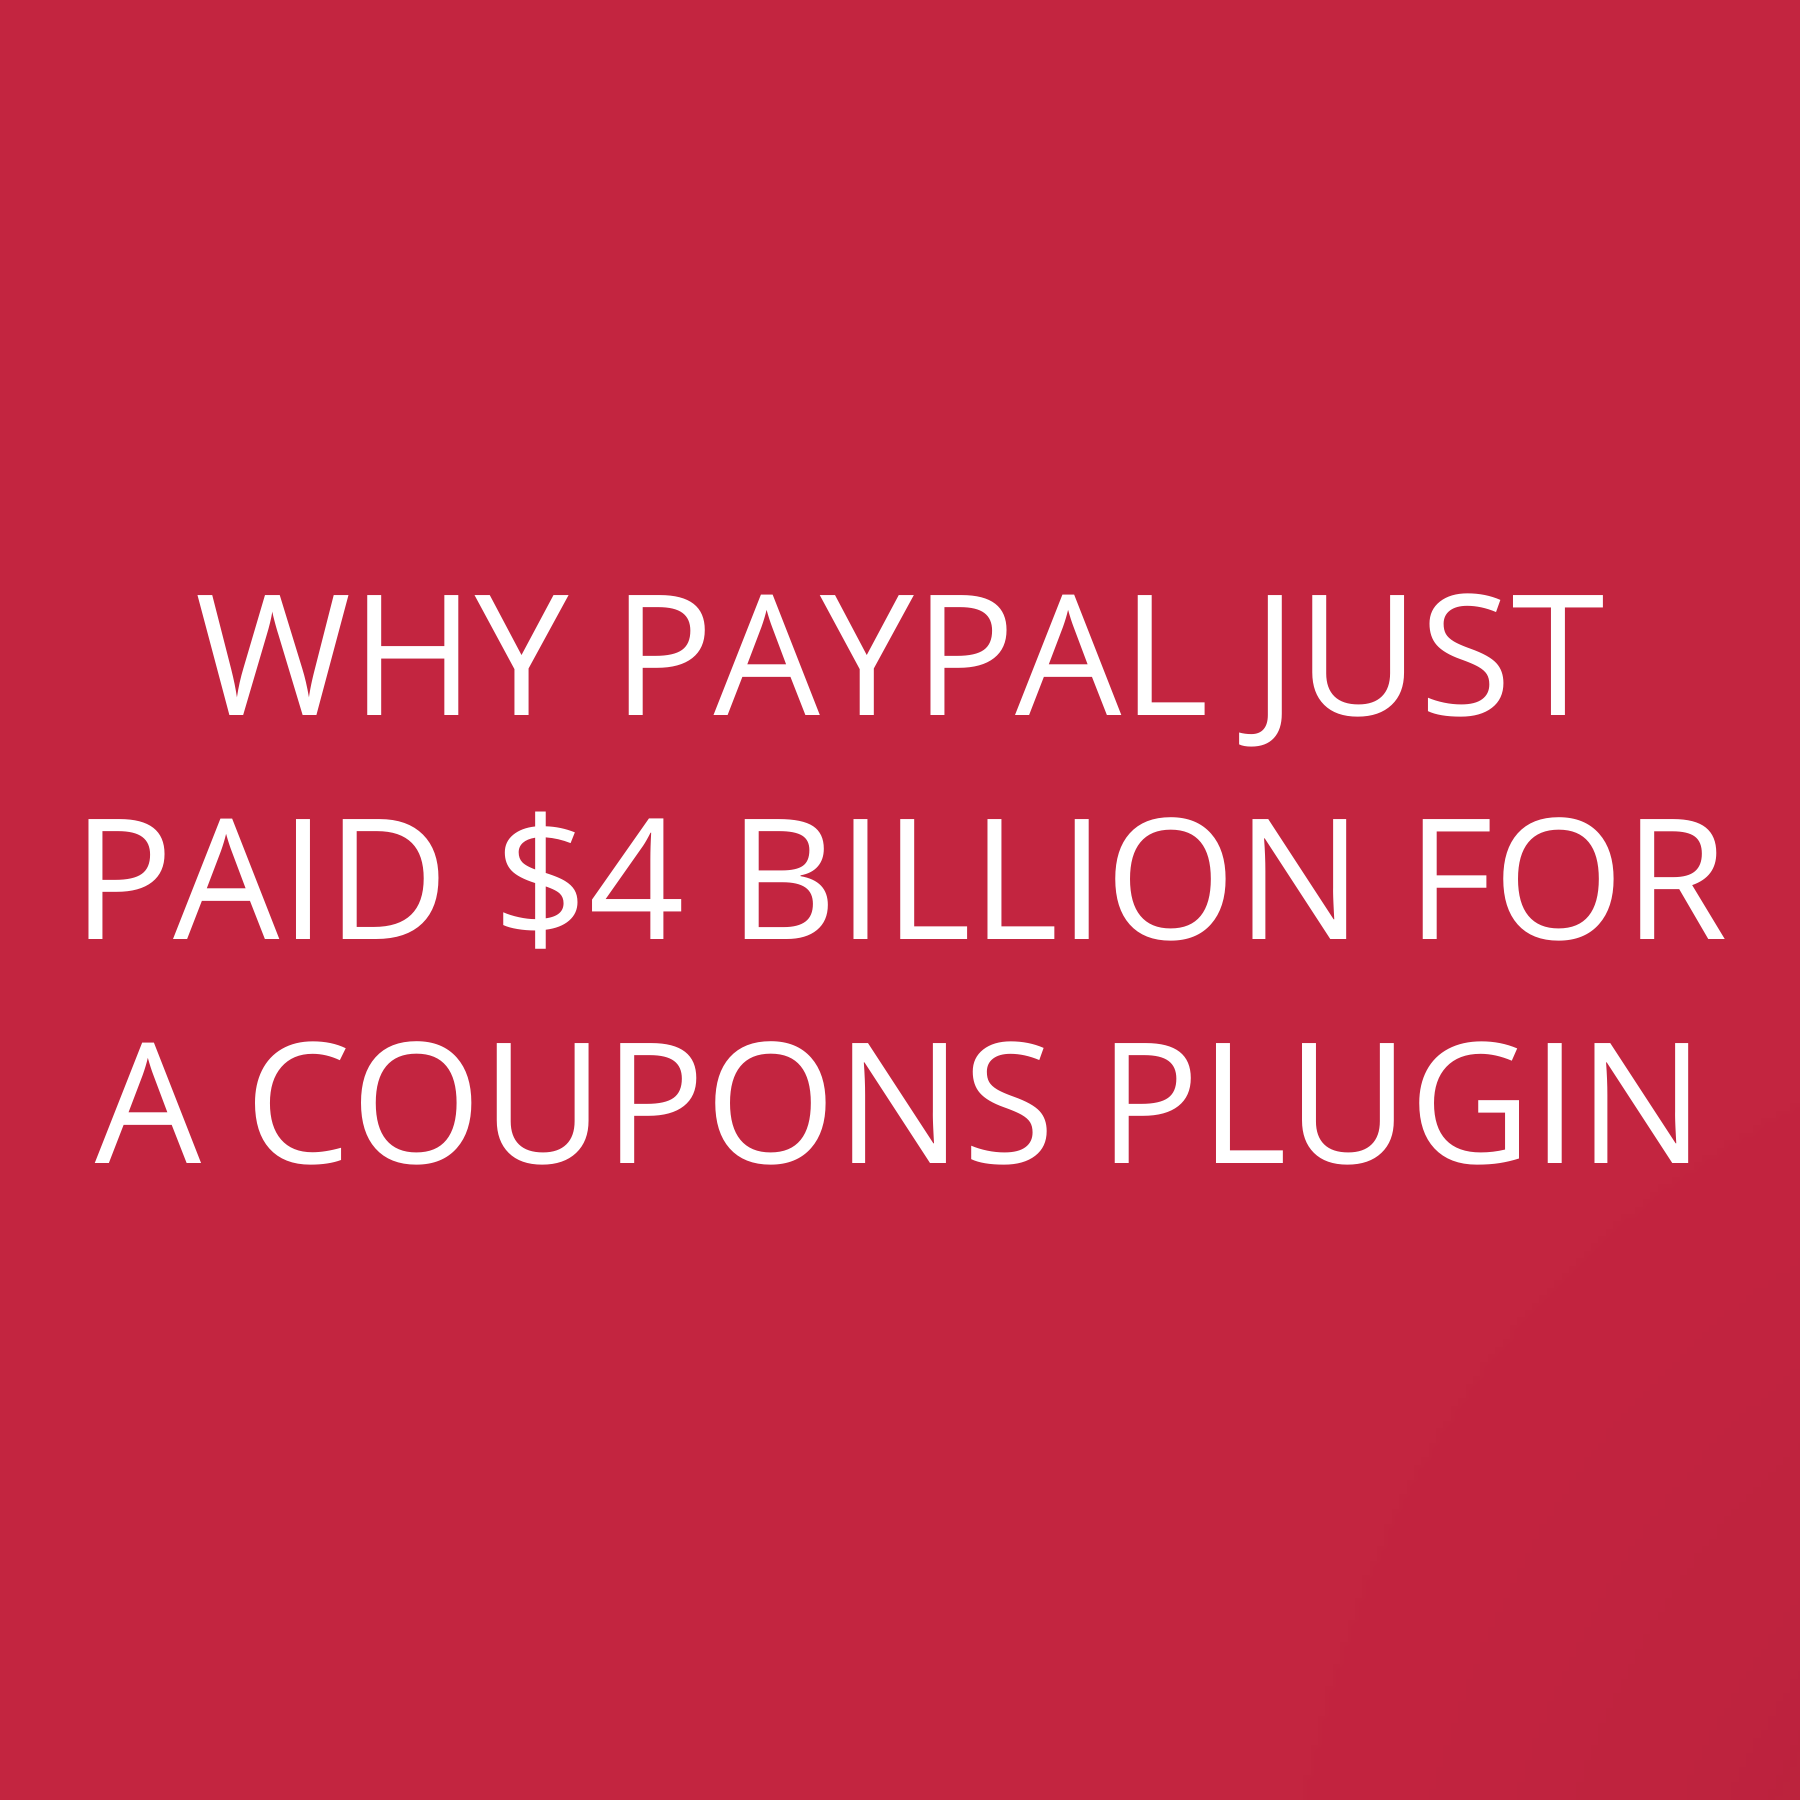 Why Paypal just paid $4 Billion for a coupons plugin